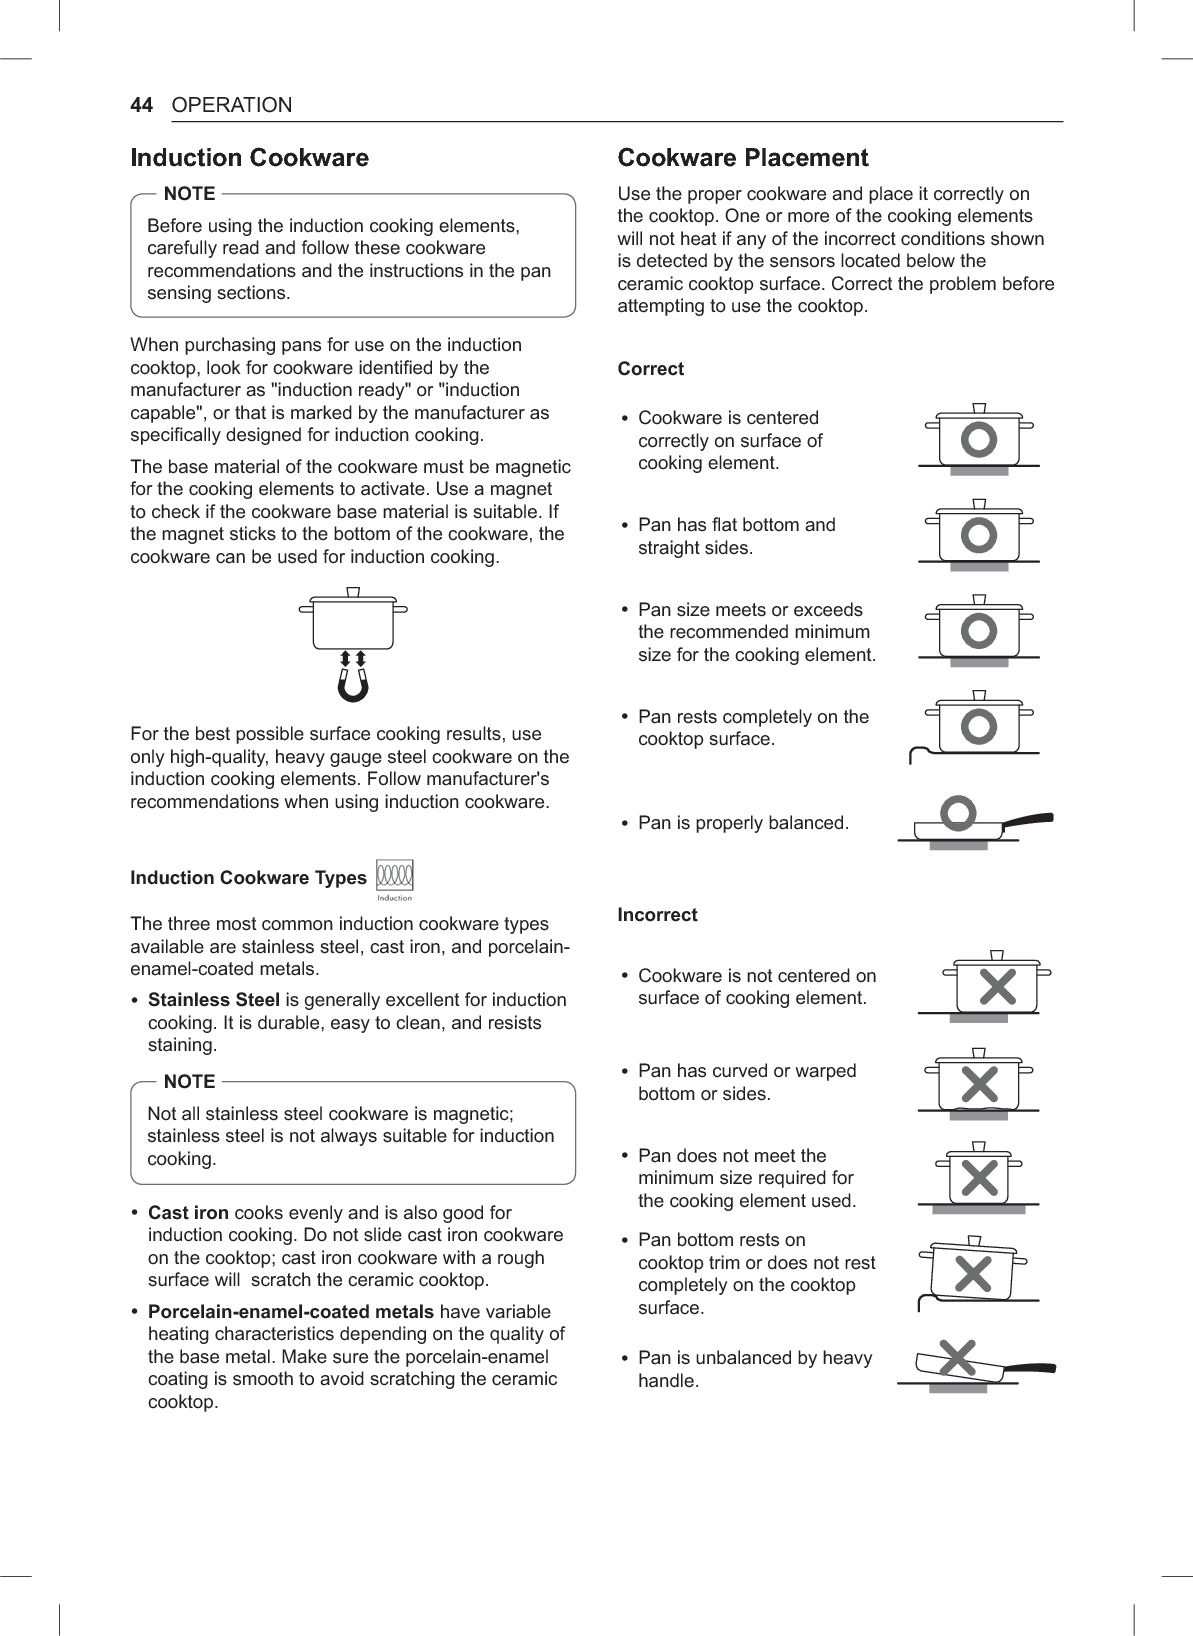 44 OPERATIONInduction CookwareNOTEBefore using the induction cooking elements, carefully read and follow these cookware recommendations and the instructions in the pan sensing sections.When purchasing pans for use on the induction cooktop, look for cookware identified by the manufacturer as &quot;induction ready&quot; or &quot;induction capable&quot;, or that is marked by the manufacturer as specifically designed for induction cooking.The base material of the cookware must be magnetic for the cooking elements to activate. Use a magnet to check if the cookware base material is suitable. If the magnet sticks to the bottom of the cookware, the cookware can be used for induction cooking.For the best possible surface cooking results, use only high-quality, heavy gauge steel cookware on the induction cooking elements. Follow manufacturer&apos;s recommendations when using induction cookware.Induction Cookware Types The three most common induction cookware types available are stainless steel, cast iron, and porcelain-enamel-coated metals. %Stainless Steel is generally excellent for induction cooking. It is durable, easy to clean, and resists staining.NOTENot all stainless steel cookware is magnetic; stainless steel is not always suitable for induction cooking. %Cast iron cooks evenly and is also good for induction cooking. Do not slide cast iron cookware on the cooktop; cast iron cookware with a rough surface will  scratch the ceramic cooktop. %Porcelain-enamel-coated metals have variable heating characteristics depending on the quality of the base metal. Make sure the porcelain-enamel coating is smooth to avoid scratching the ceramic cooktop.Cookware PlacementUse the proper cookware and place it correctly on the cooktop. One or more of the cooking elements will not heat if any of the incorrect conditions shown is detected by the sensors located below the ceramic cooktop surface. Correct the problem before attempting to use the cooktop.Correct %Cookware is centered correctly on surface of cooking element. %Pan has flat bottom and straight sides. %Pan size meets or exceeds the recommended minimum size for the cooking element. %Pan rests completely on the cooktop surface. %Pan is properly balanced.Incorrect %Cookware is not centered on surface of cooking element. %Pan has curved or warped bottom or sides. %Pan does not meet the minimum size required for the cooking element used. %Pan bottom rests on cooktop trim or does not rest completely on the cooktop surface.  %Pan is unbalanced by heavy handle.